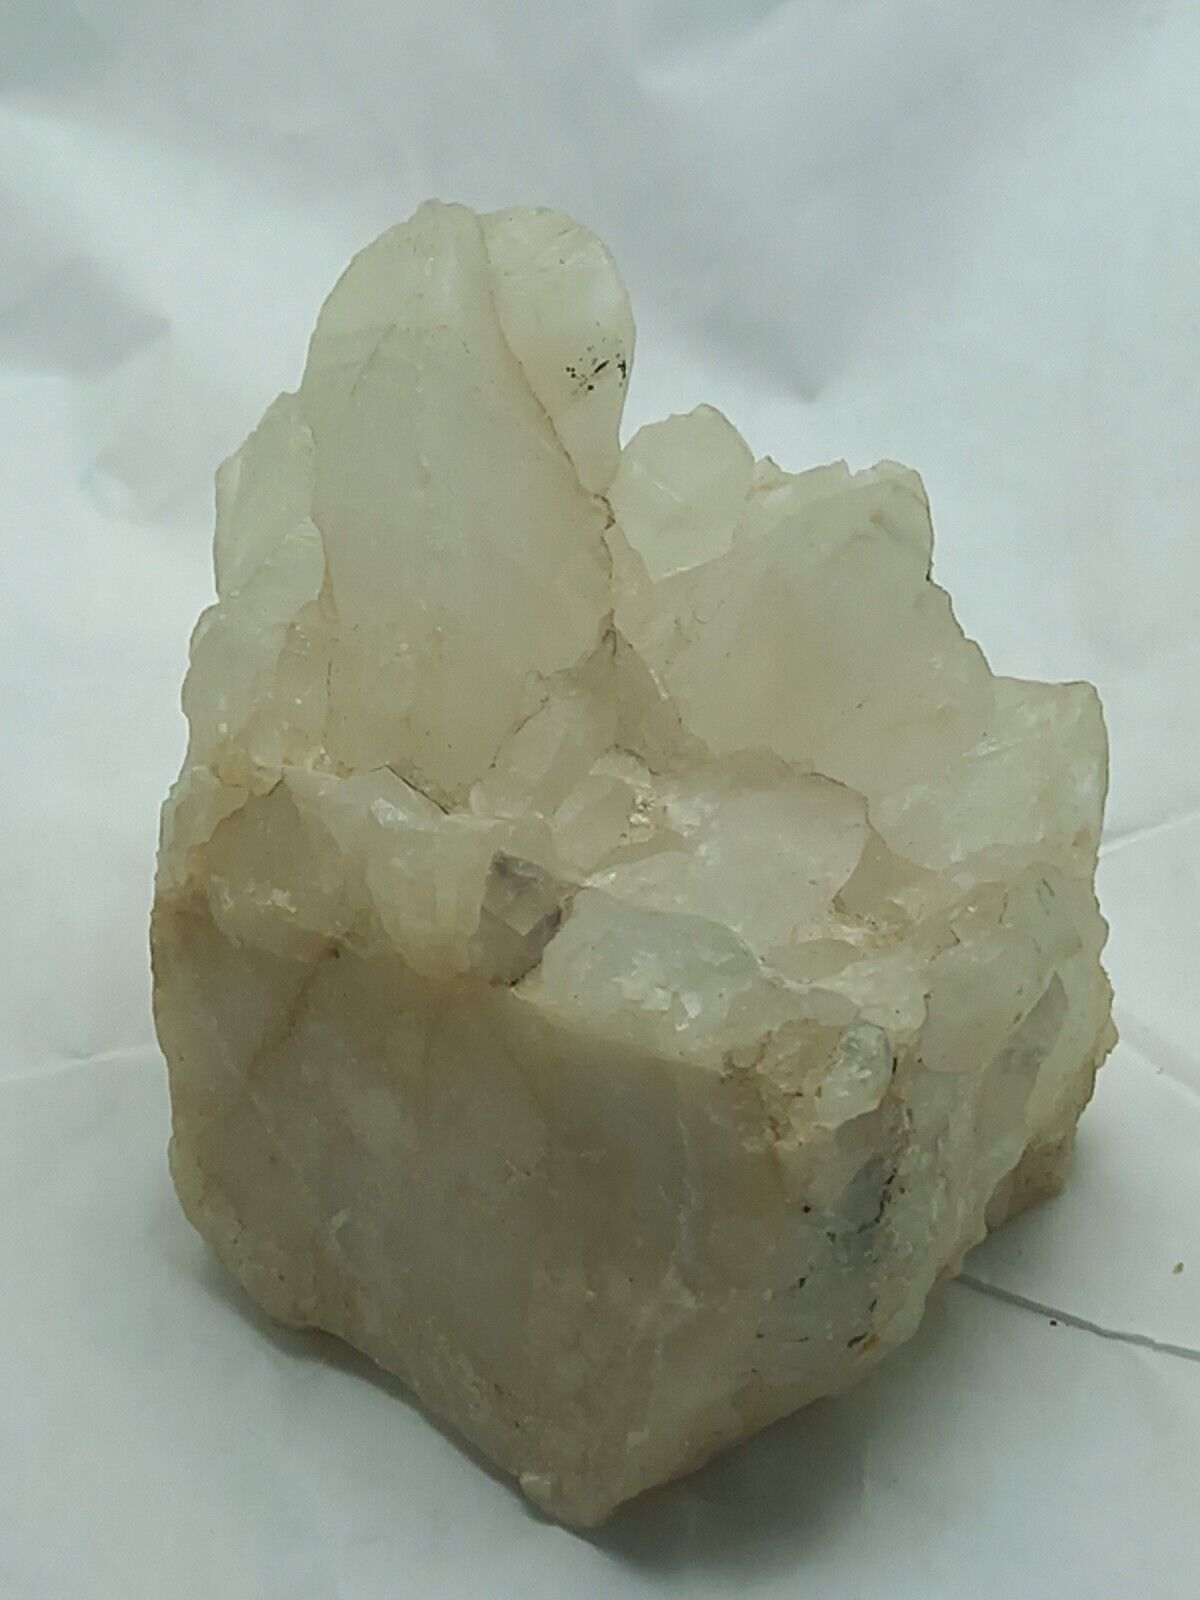 Natural White Calcite Crystal Cluster Piece 7cm x 6cm